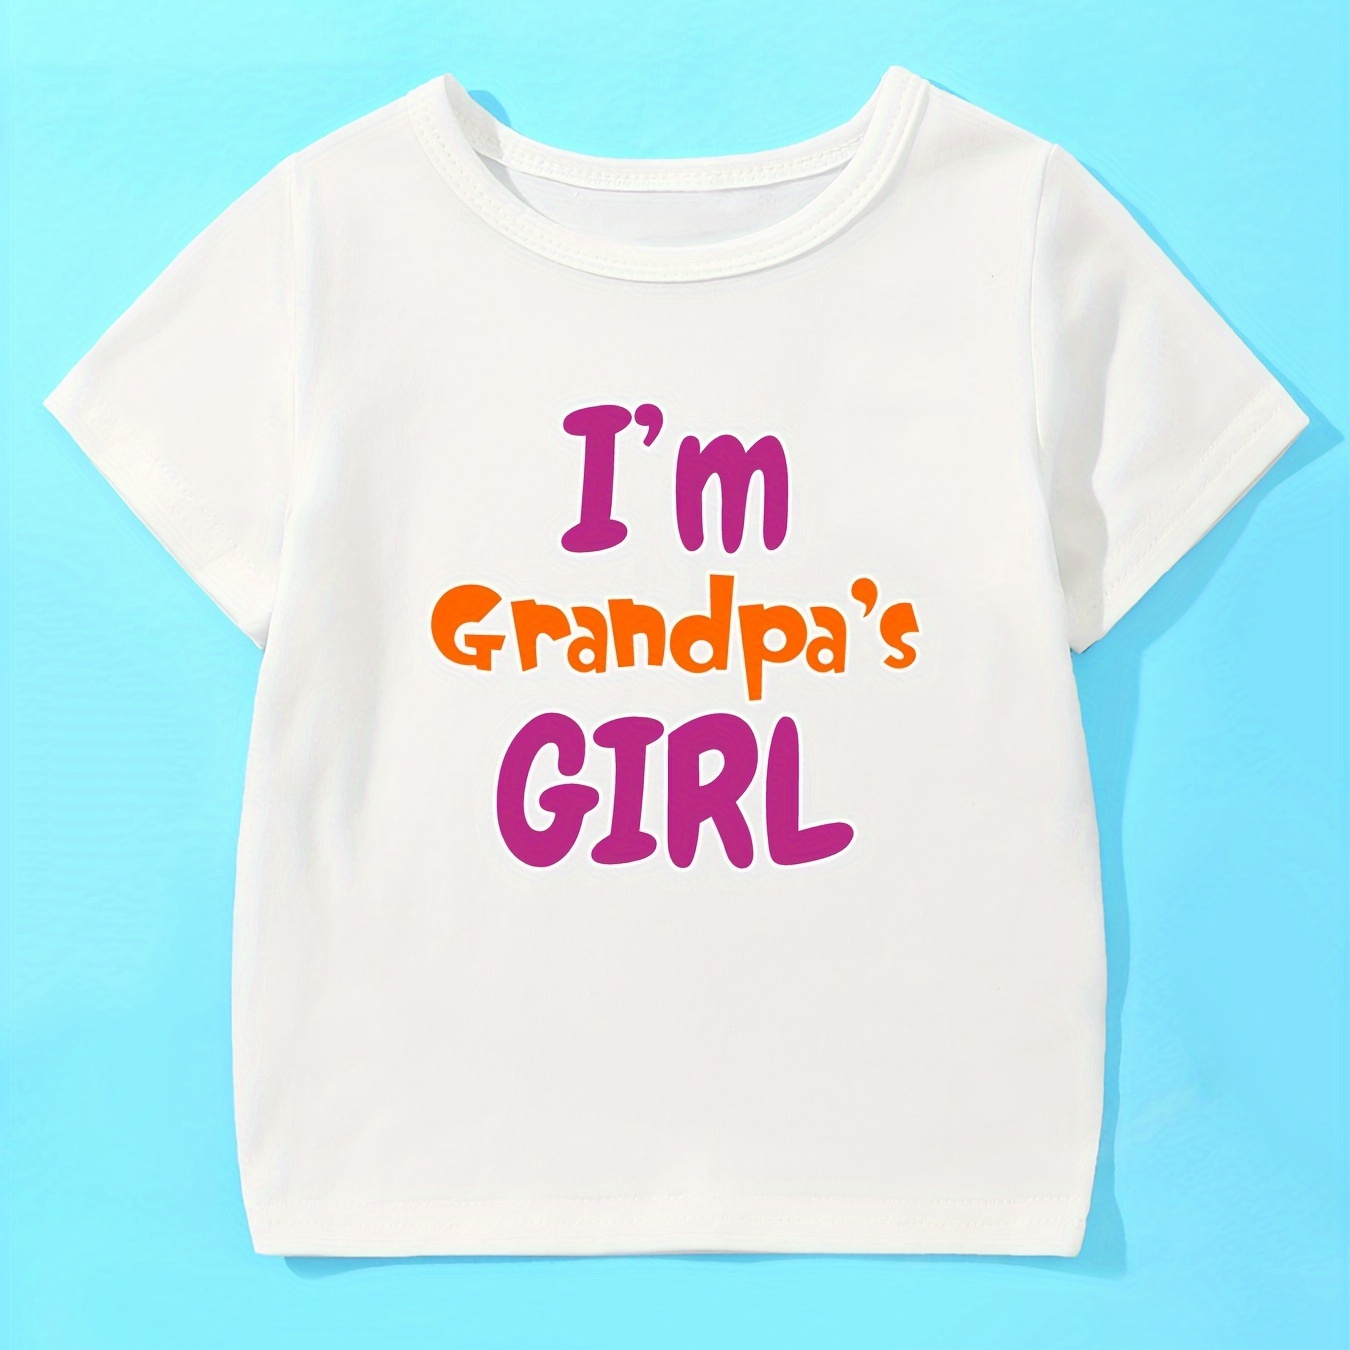 

I'm Grandpa's Girl Print, Baby Girls' Comfy 95% Cotton Short-sleeve T-shirt Pullover For Spring And Summer For Outdoor Activities